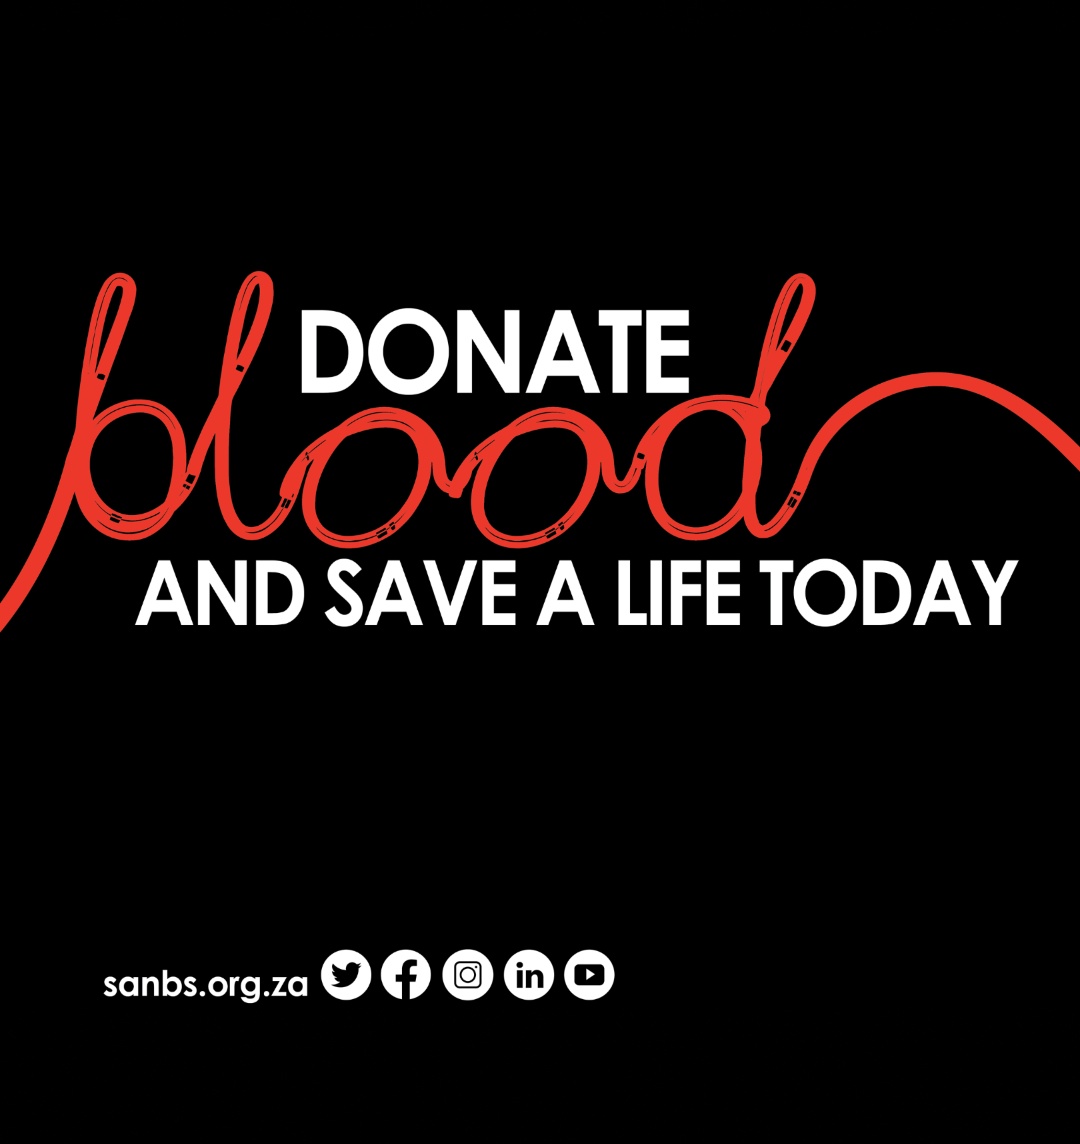 Tomorrow I'll be answering all your questions and concerns about donating blood I have noted all the questions and comments thus far. Keep them coming. Let's debunk some myths, share the correct info, and recruit new donors for  @theSANBS  #YoungBlood